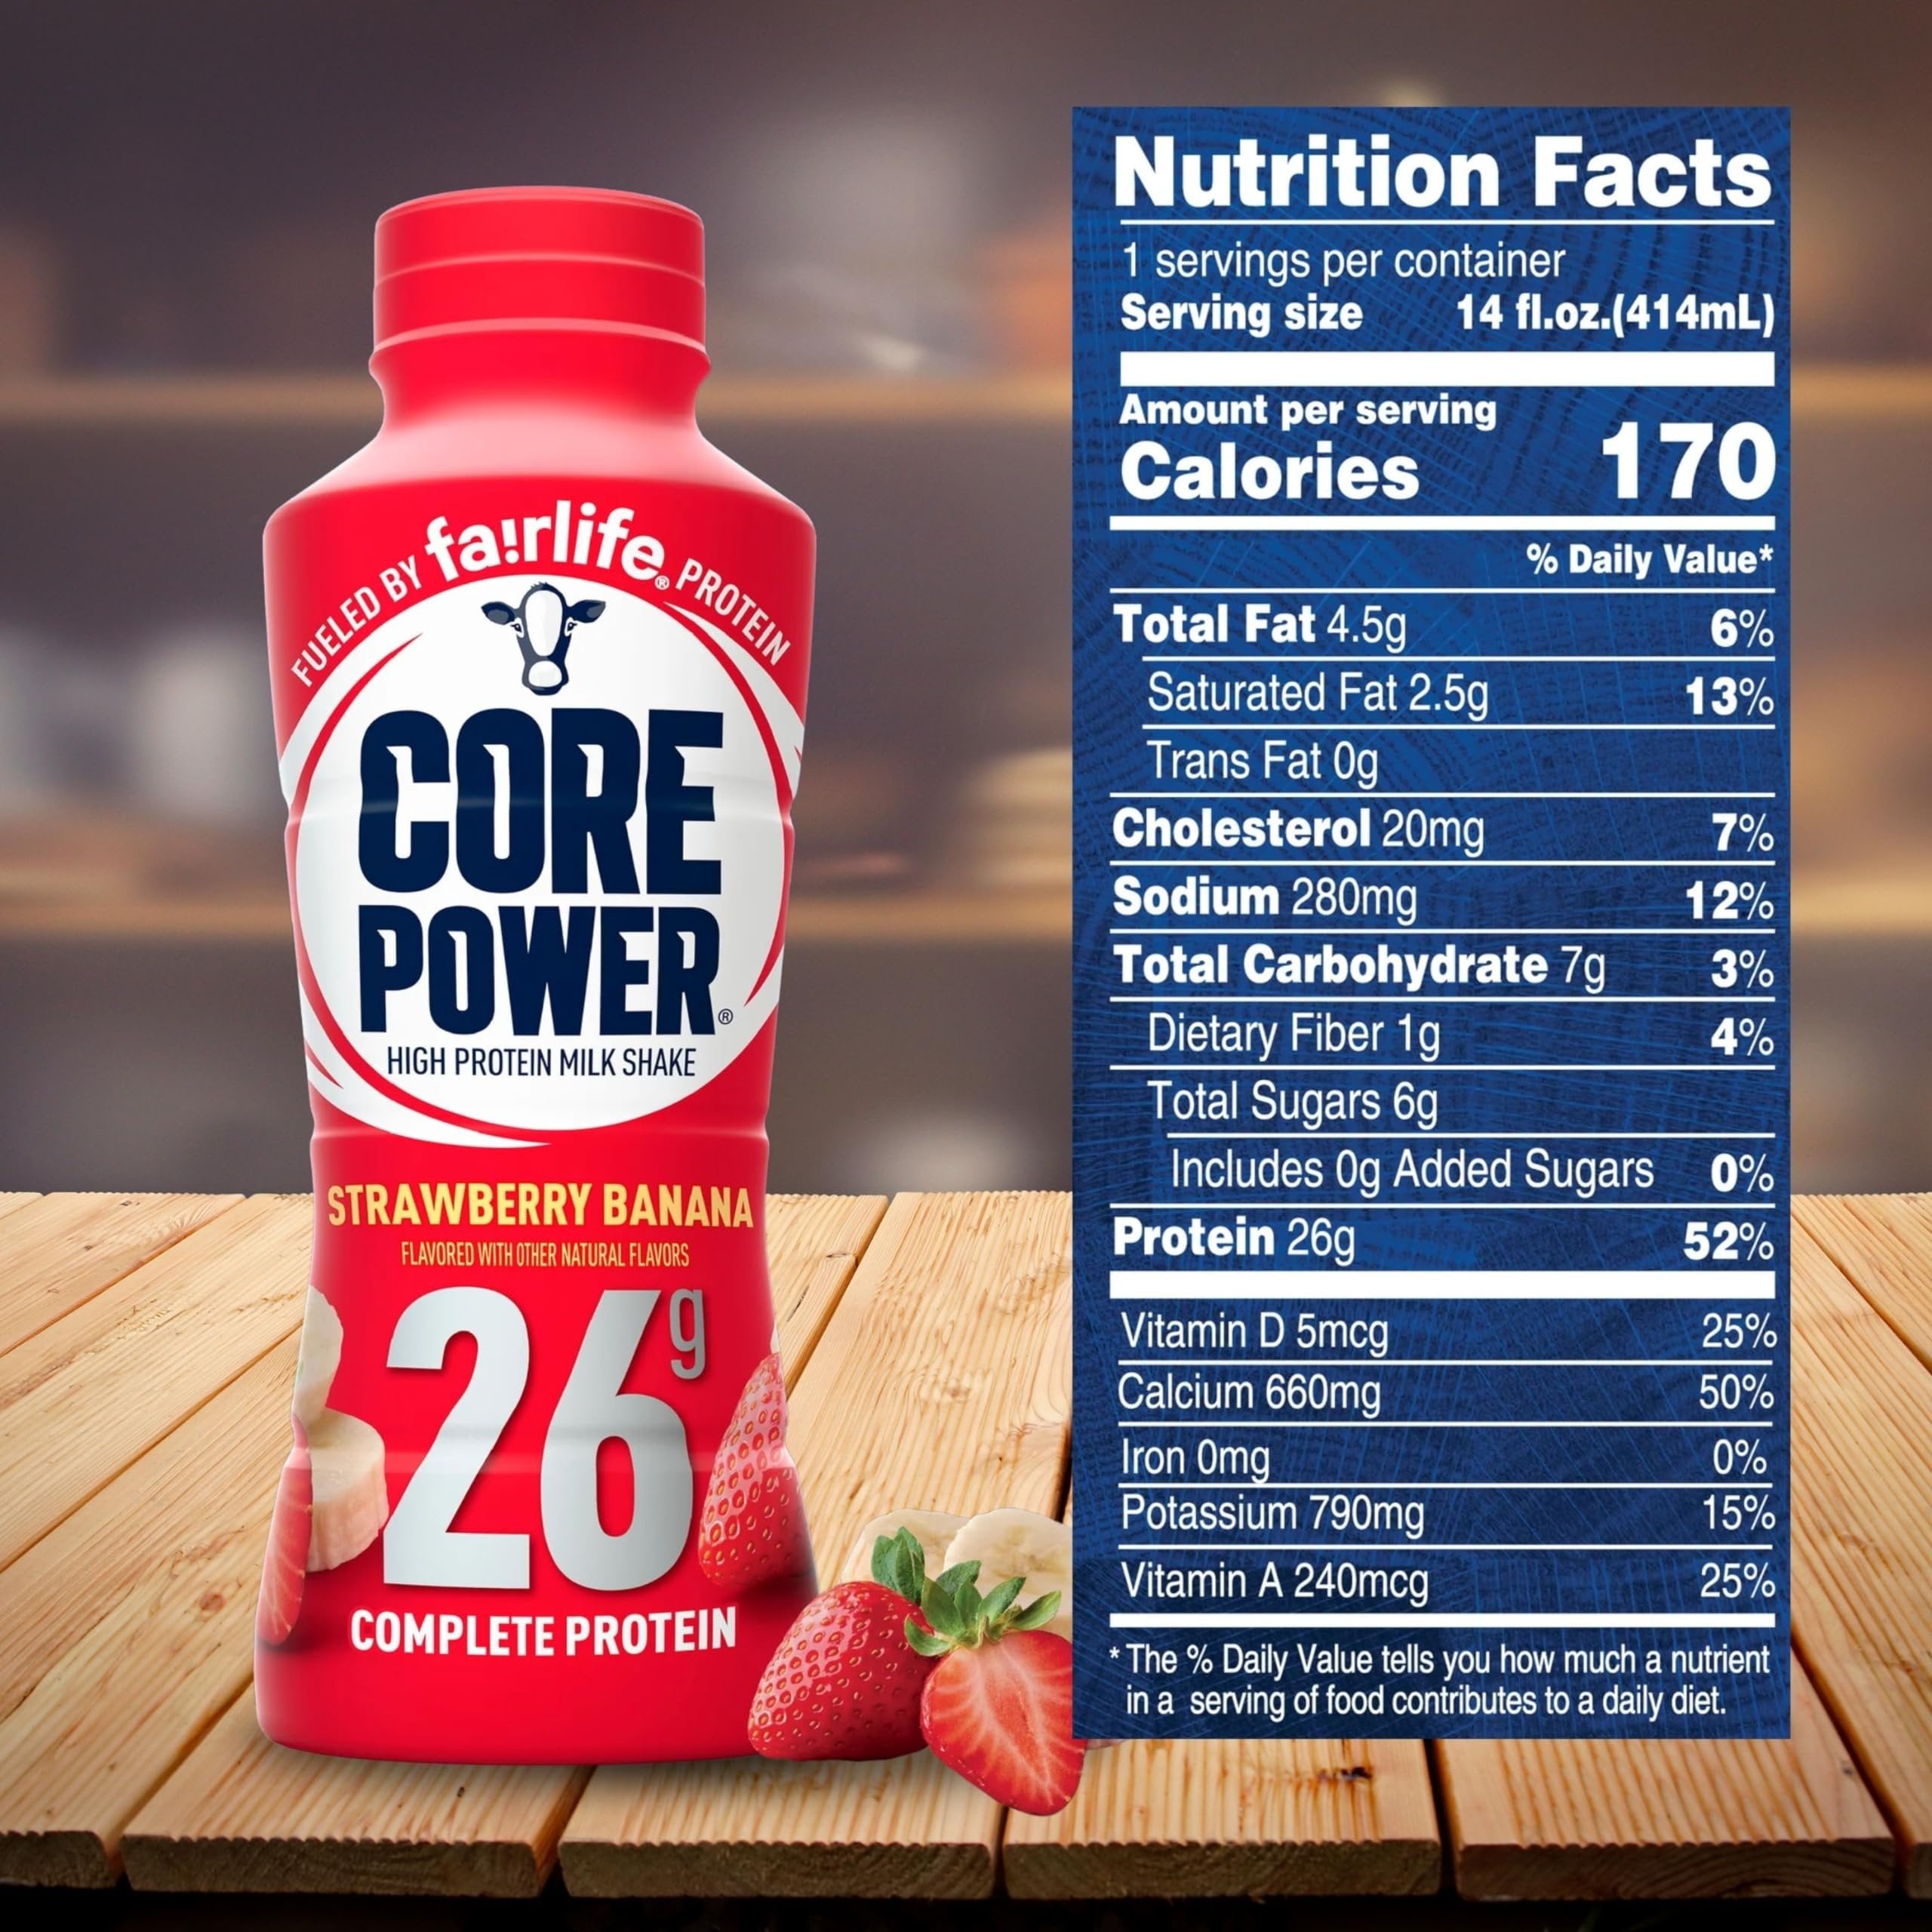 Core Power Fairlife 26g Protein Milk Shakes - Ready To Drink for Workout Recovery - Strawberry Banana Flavor, 14 Fl Oz (Pack of 12) and Multi-Purpose Key Chain